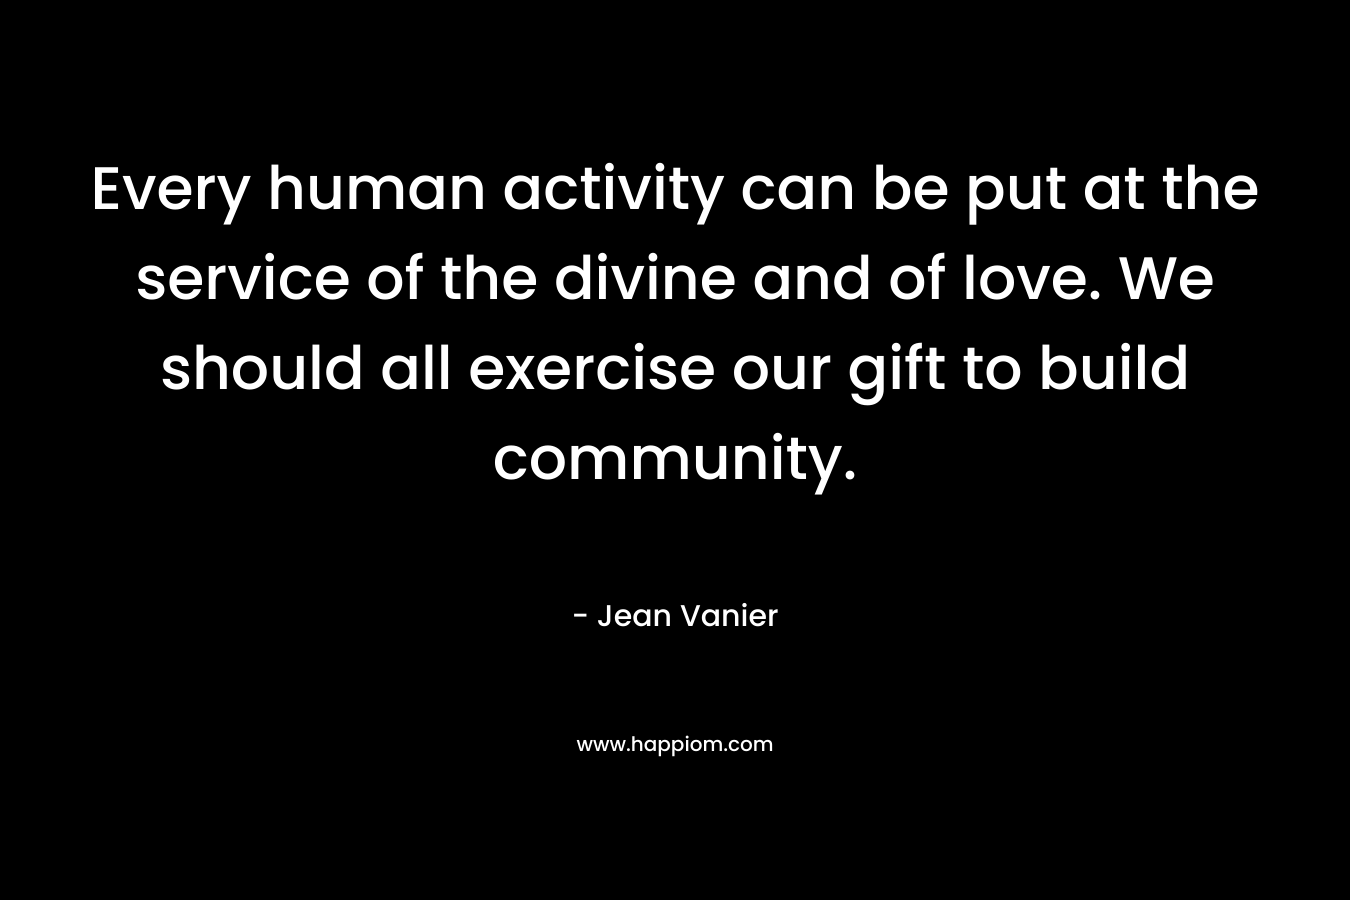 Every human activity can be put at the service of the divine and of love. We should all exercise our gift to build community.